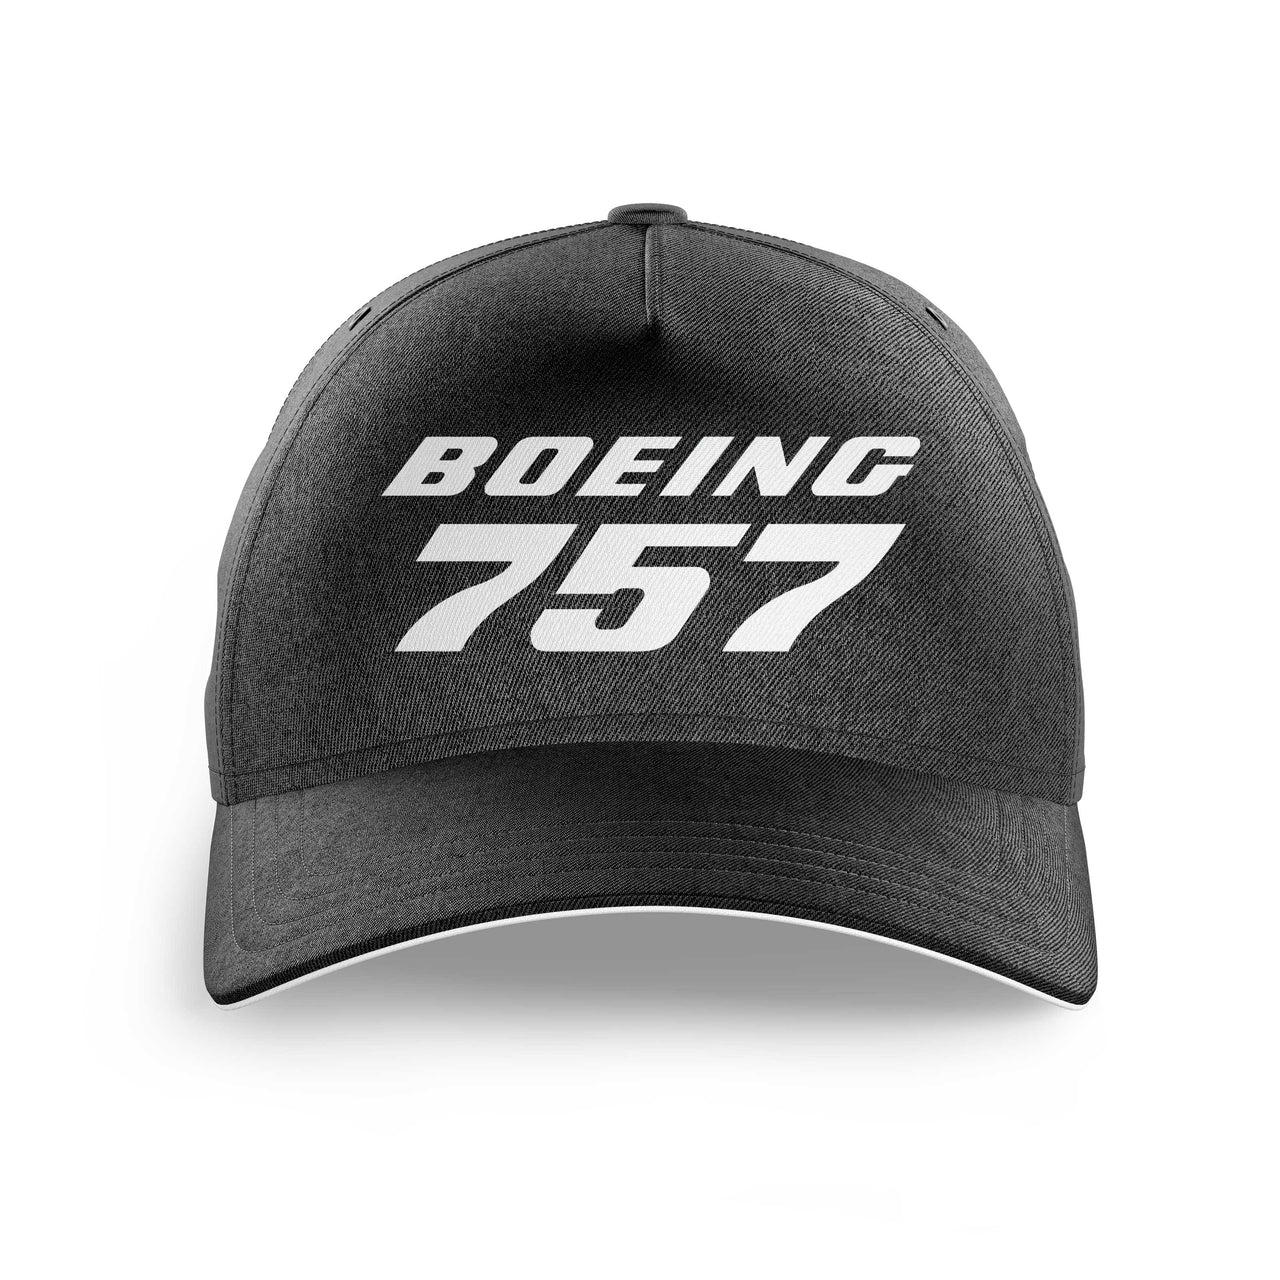 Boeing 757 & Text Printed Hats